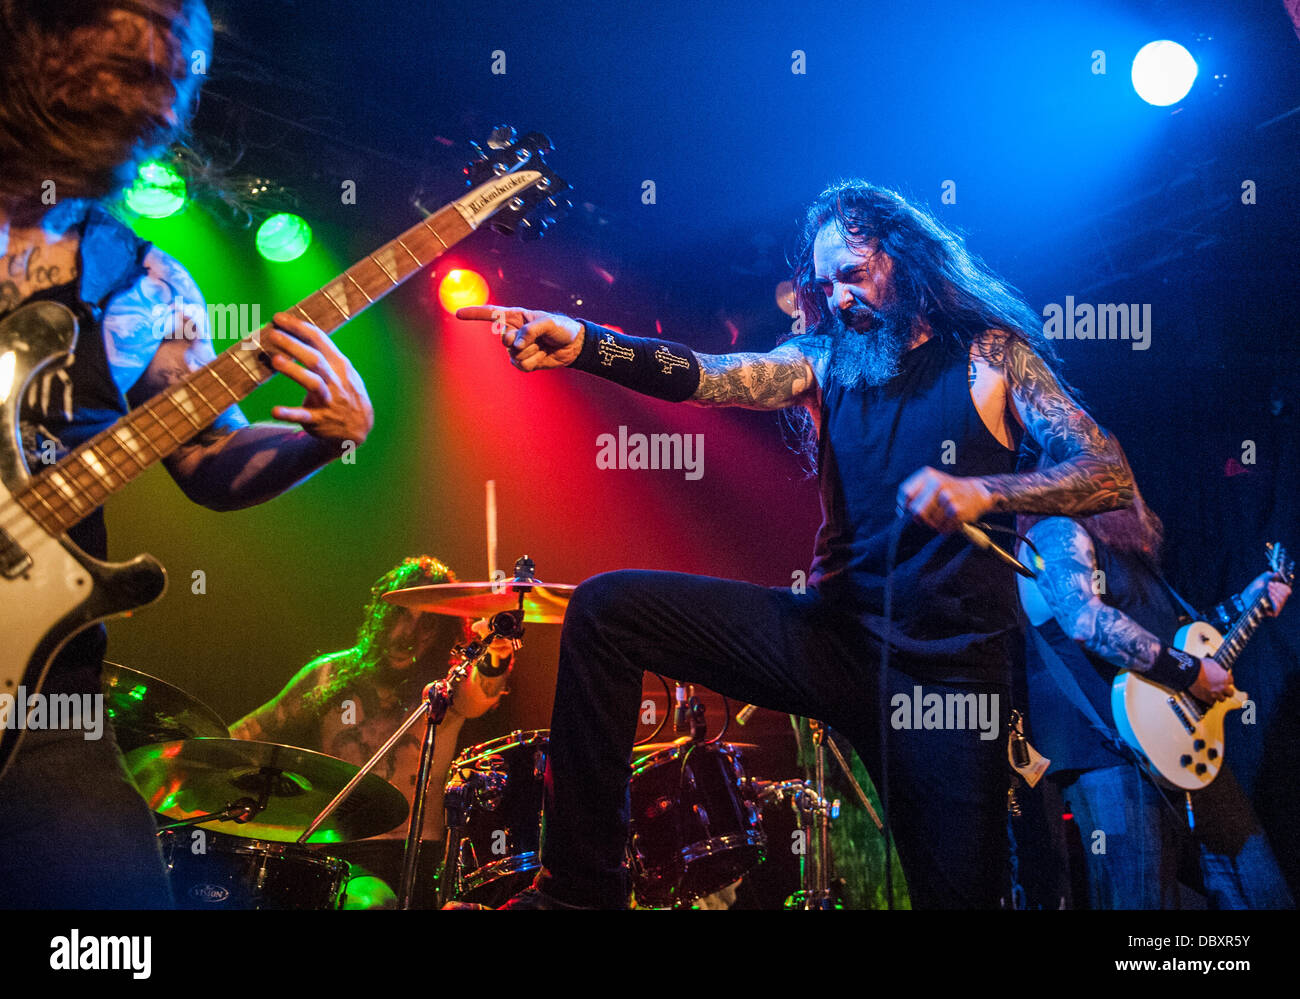 Chicago, IL, USA. 04th Aug, 2013. Ohio thrash metal band Skeletonwitch perform at a Lollapalooza afterparty at the Double Door in Chicago, IL August 3, 2013 © Brigette Sullivan/Alamy Live News Stock Photo